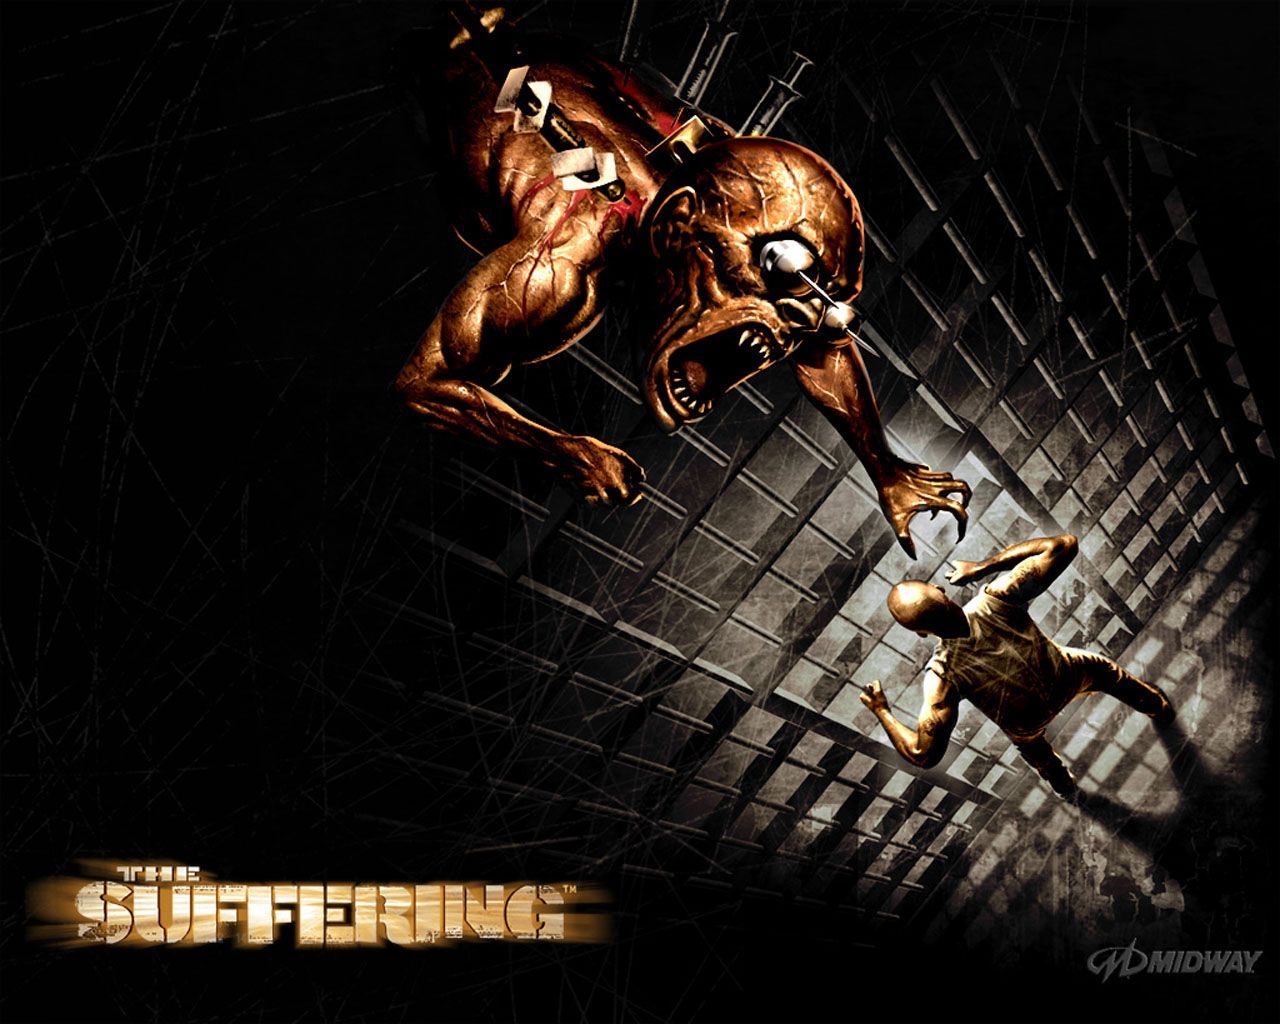 The Suffering Wallpaper. Pc Games Wallpaper. Pc games